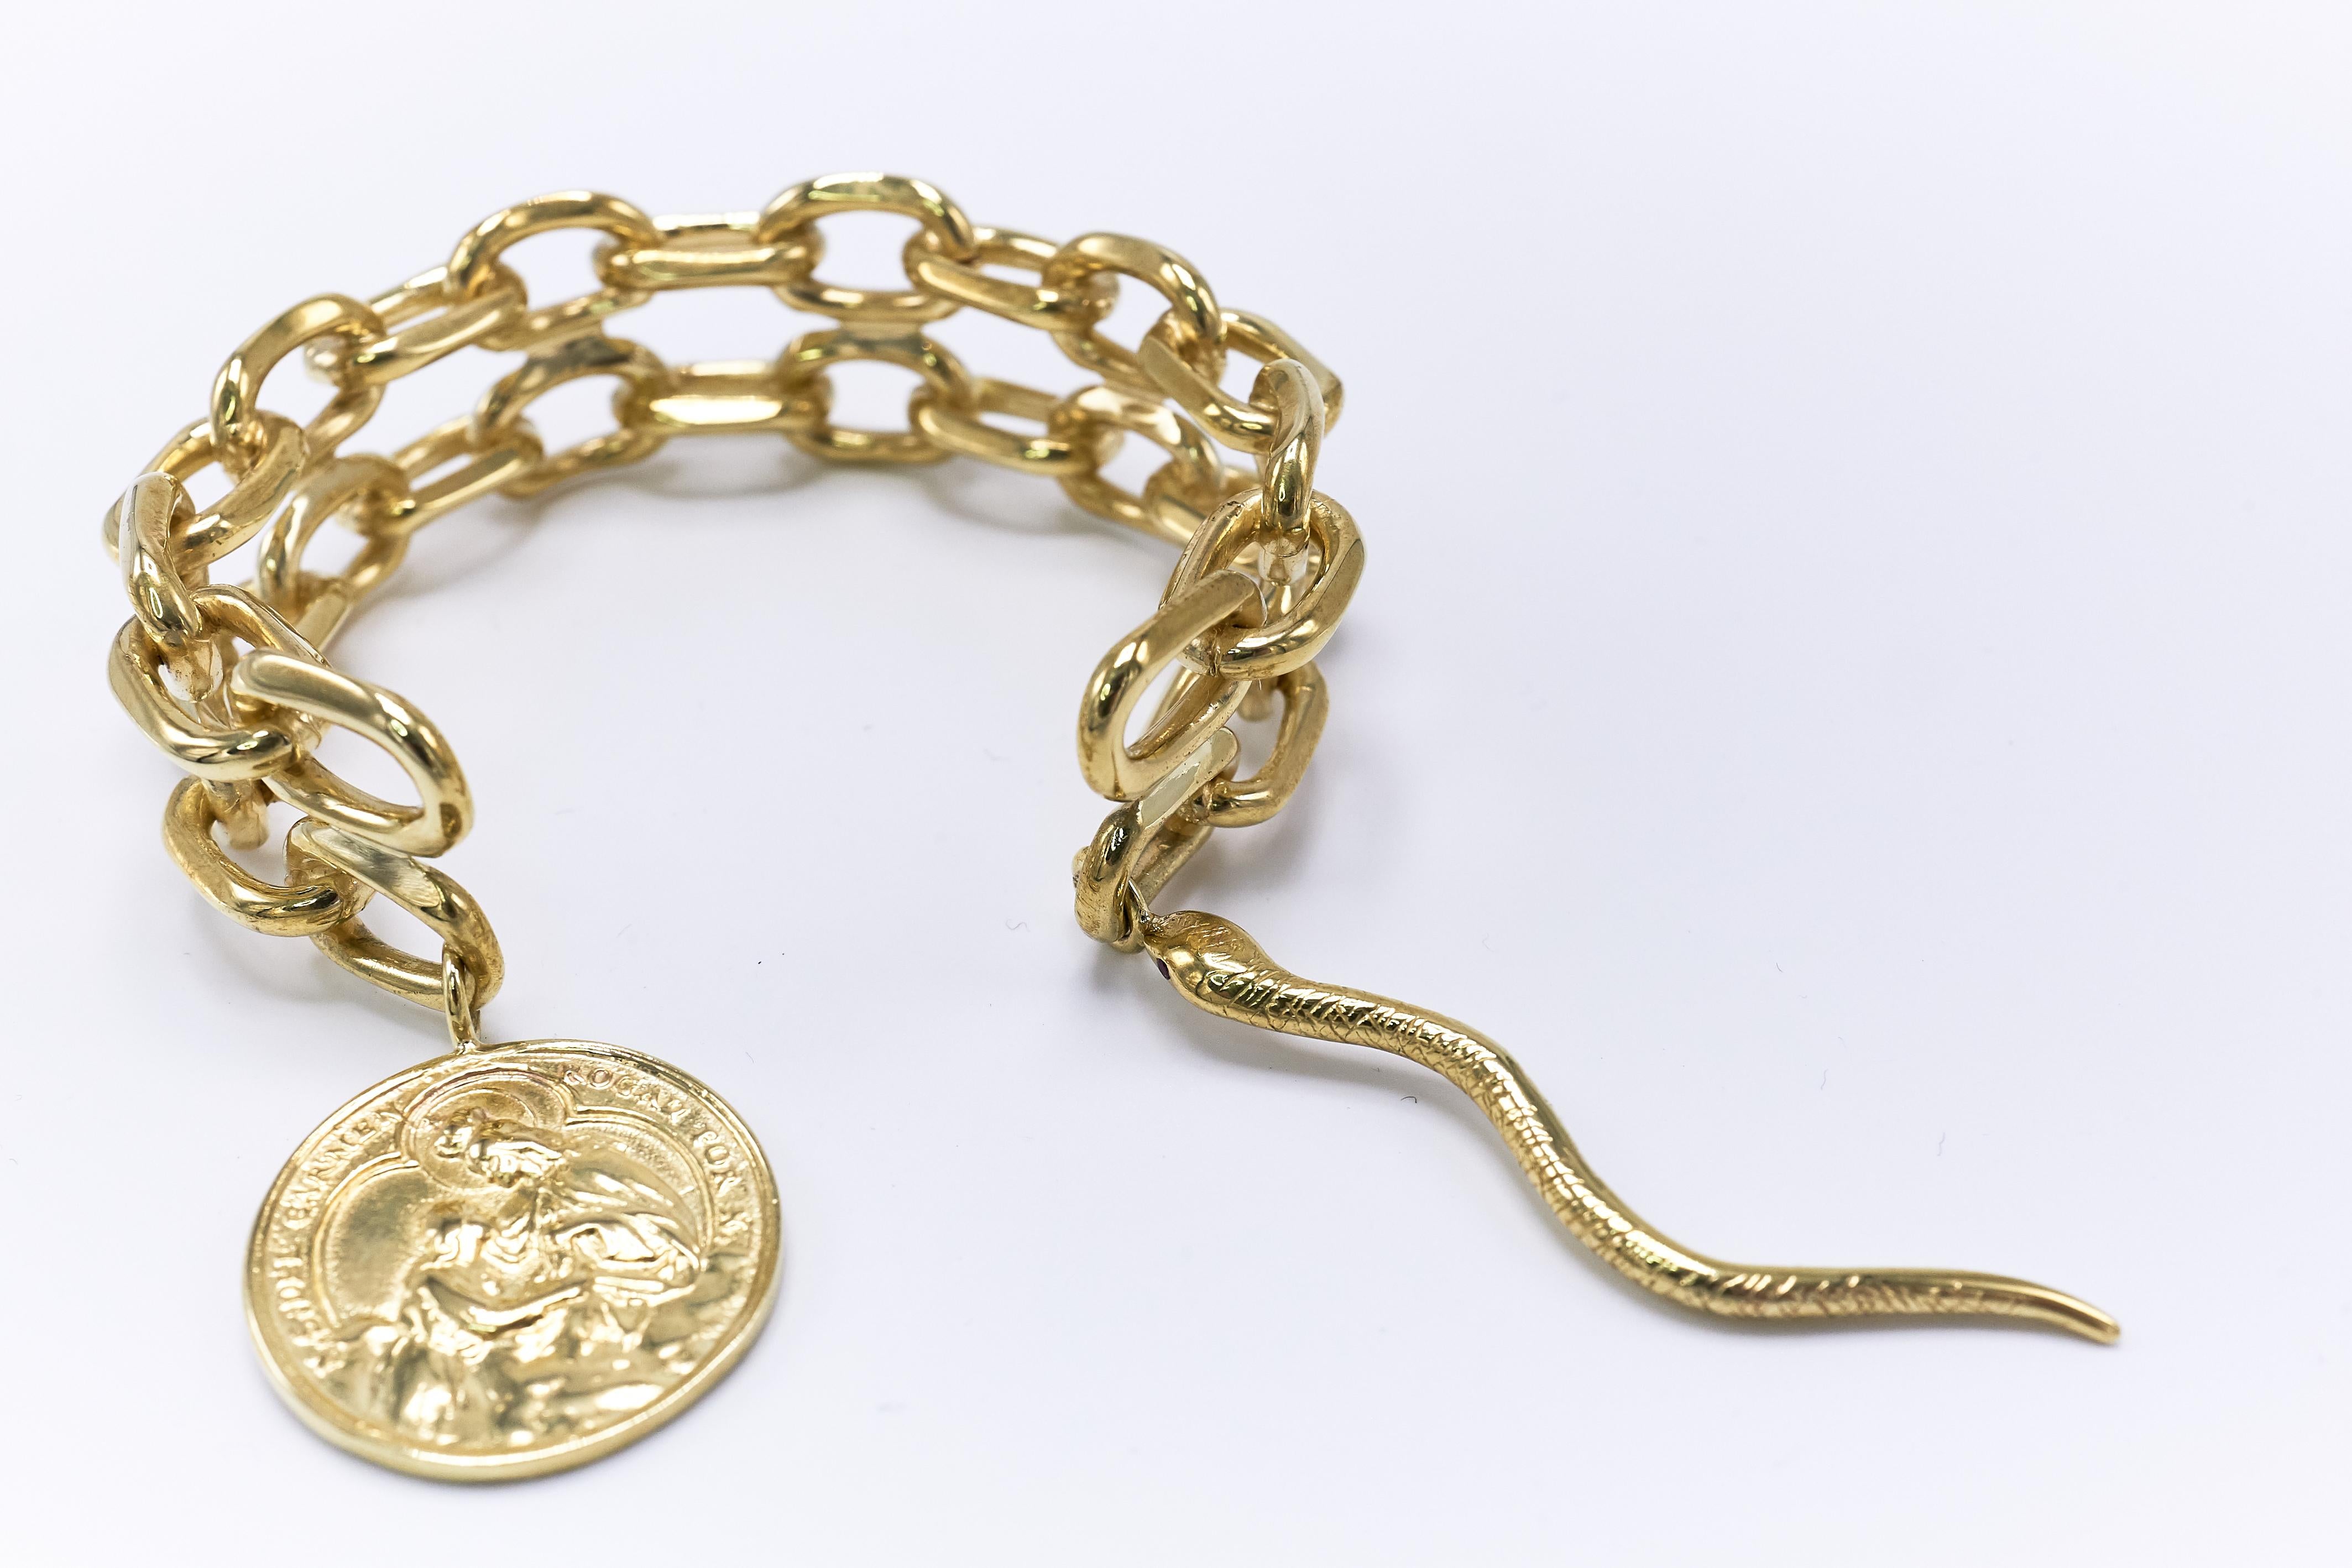 Contemporary Statement Chunky Chain Cuff Bangle Bracelet Medal Gold Vermeil J Dauphin For Sale